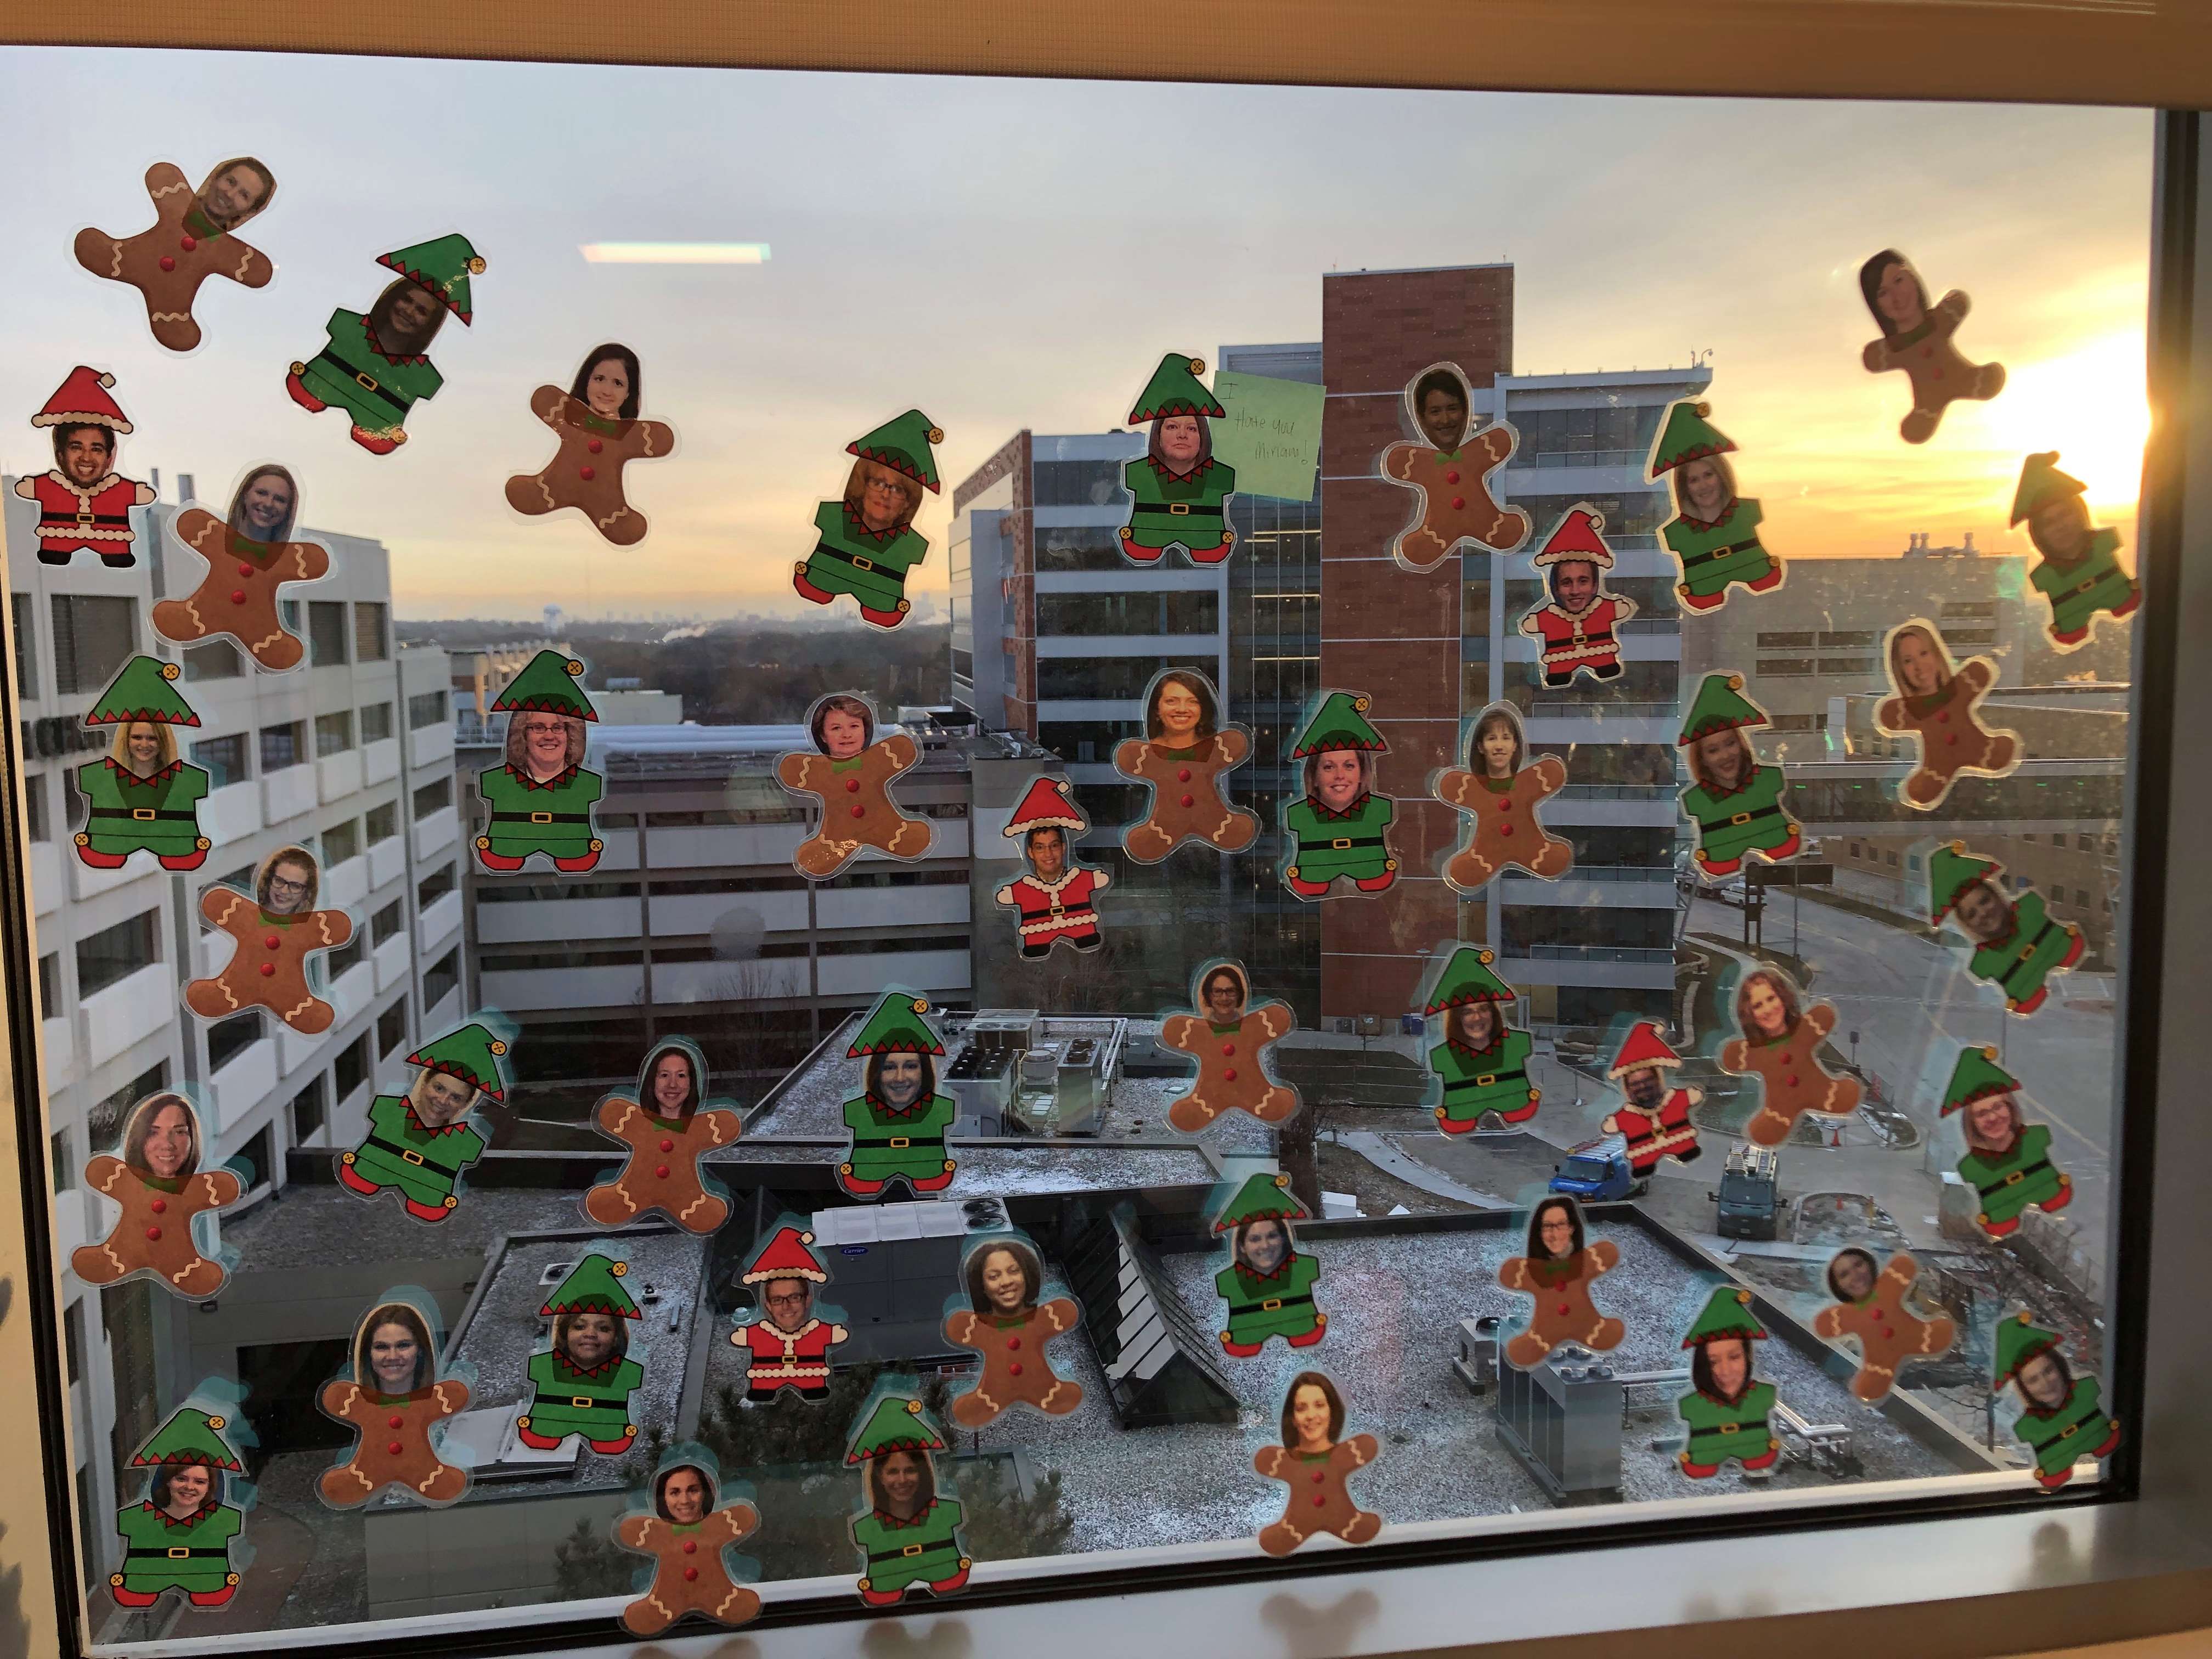 Faces on Windows for Christmas